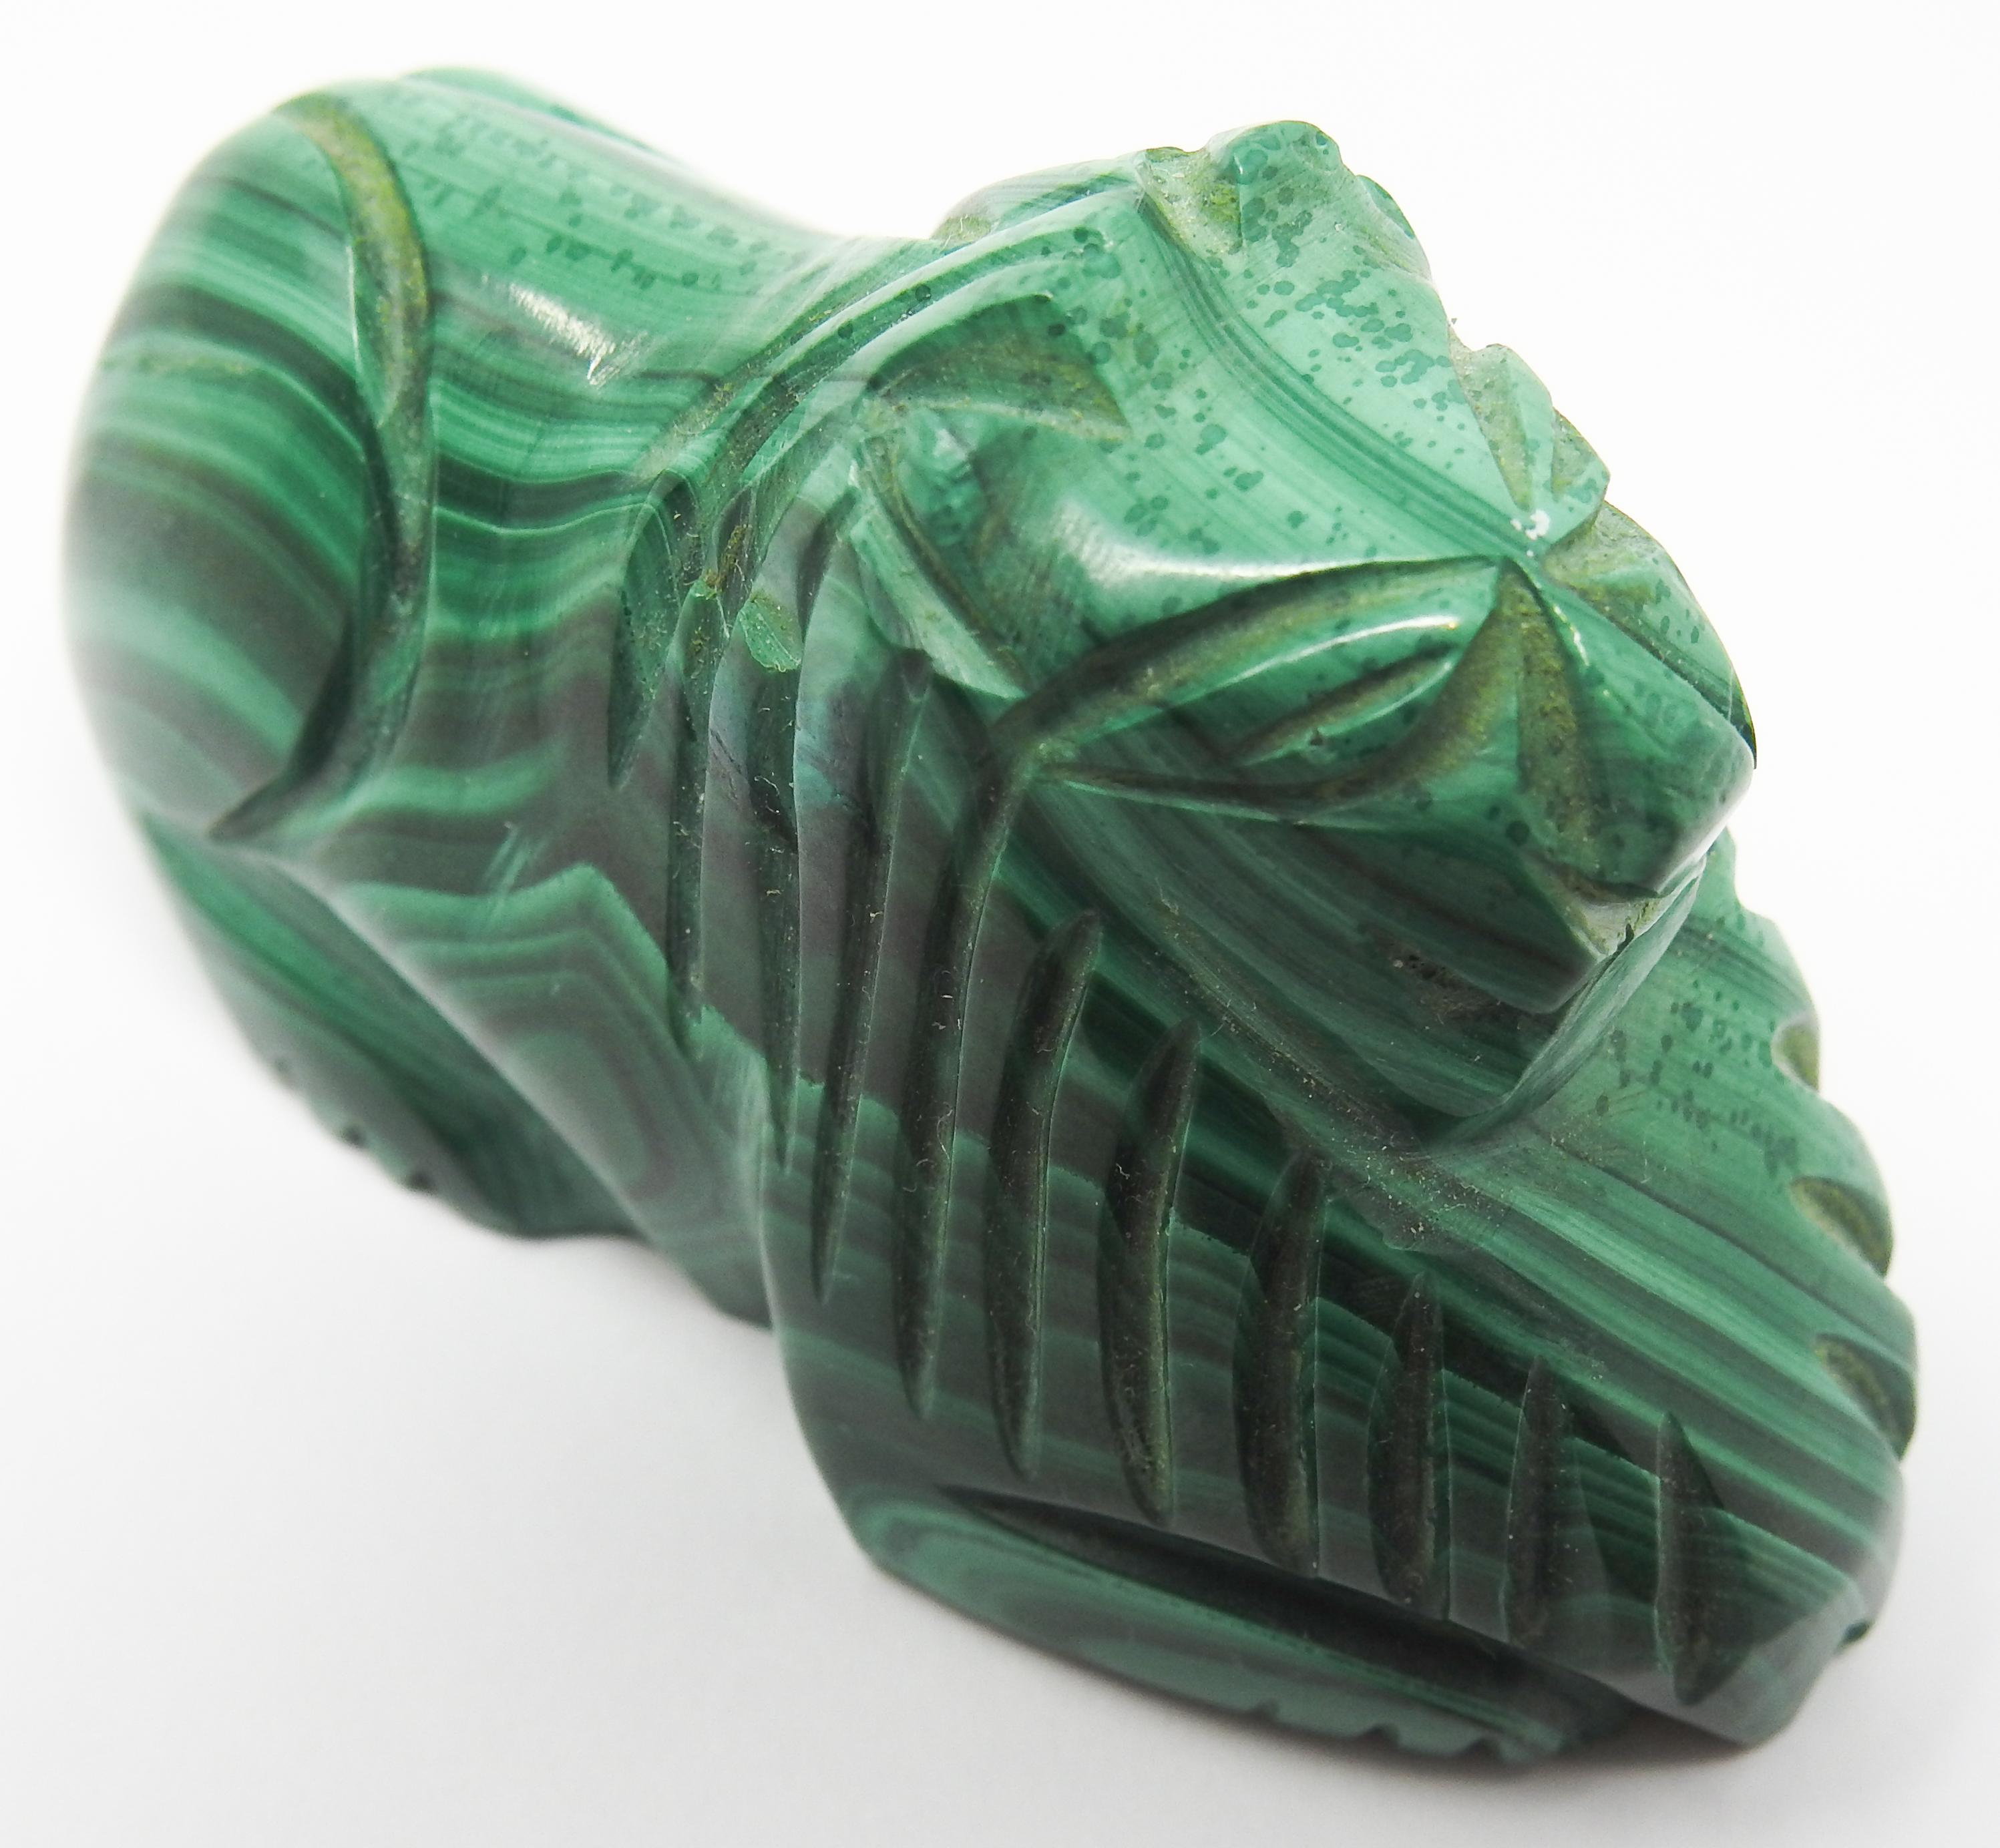 Offering this handsome Malachite lion. This small lion is hand carved with a handsome stone of malachite. Its green tones and simple lines that are carved make it an interesting piece.